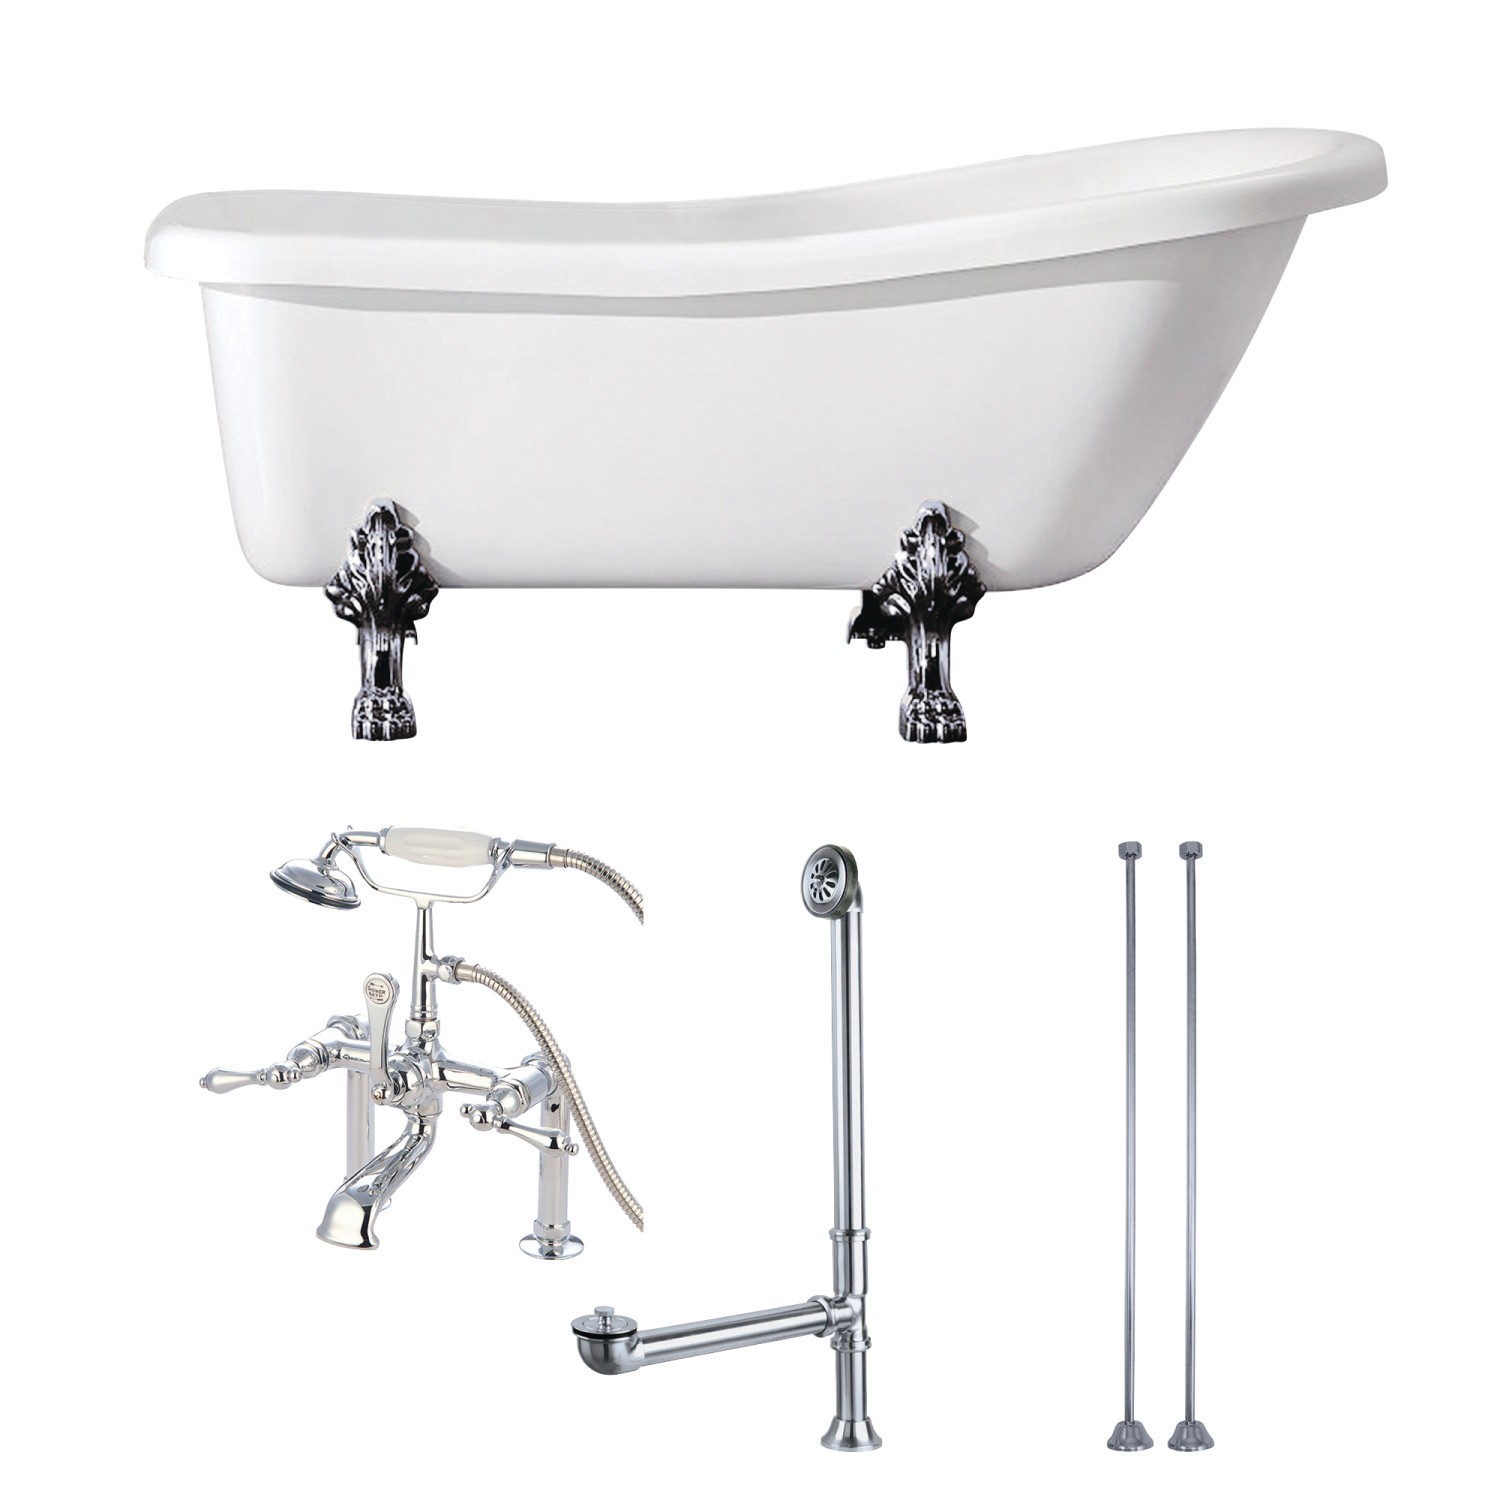 KINGSTON BRASS KVTDE692823C1 AQUA EDEN 67-INCH ACRYLIC CLAWFOOT TUB WITH FAUCET DRAIN AND SUPPLY LINES COMBO IN WHITE/POLISHED CHROME